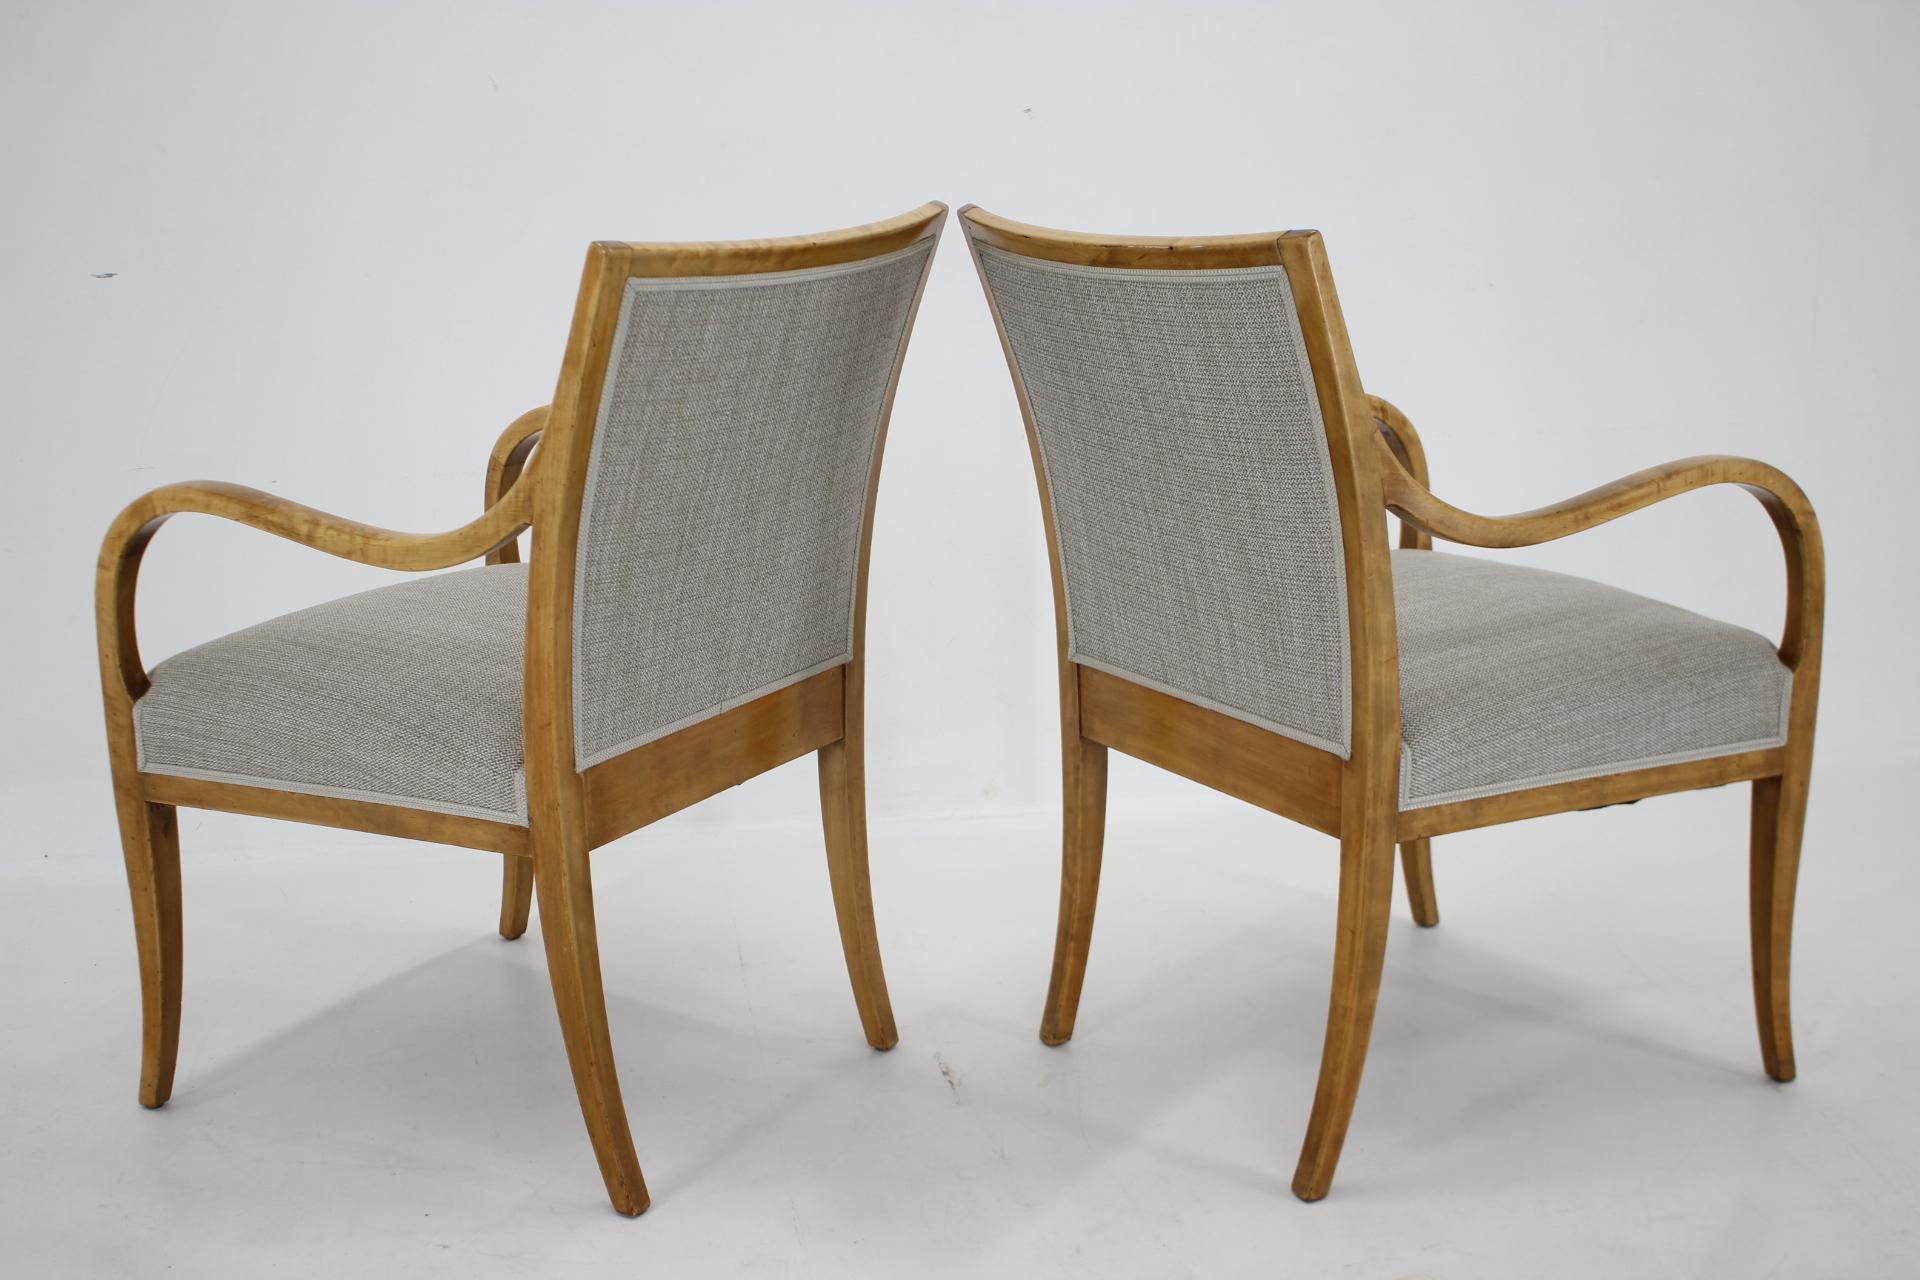 1950s Pair of Frits Henningsen Armchairs in Birch Wood, Denmark For Sale 4